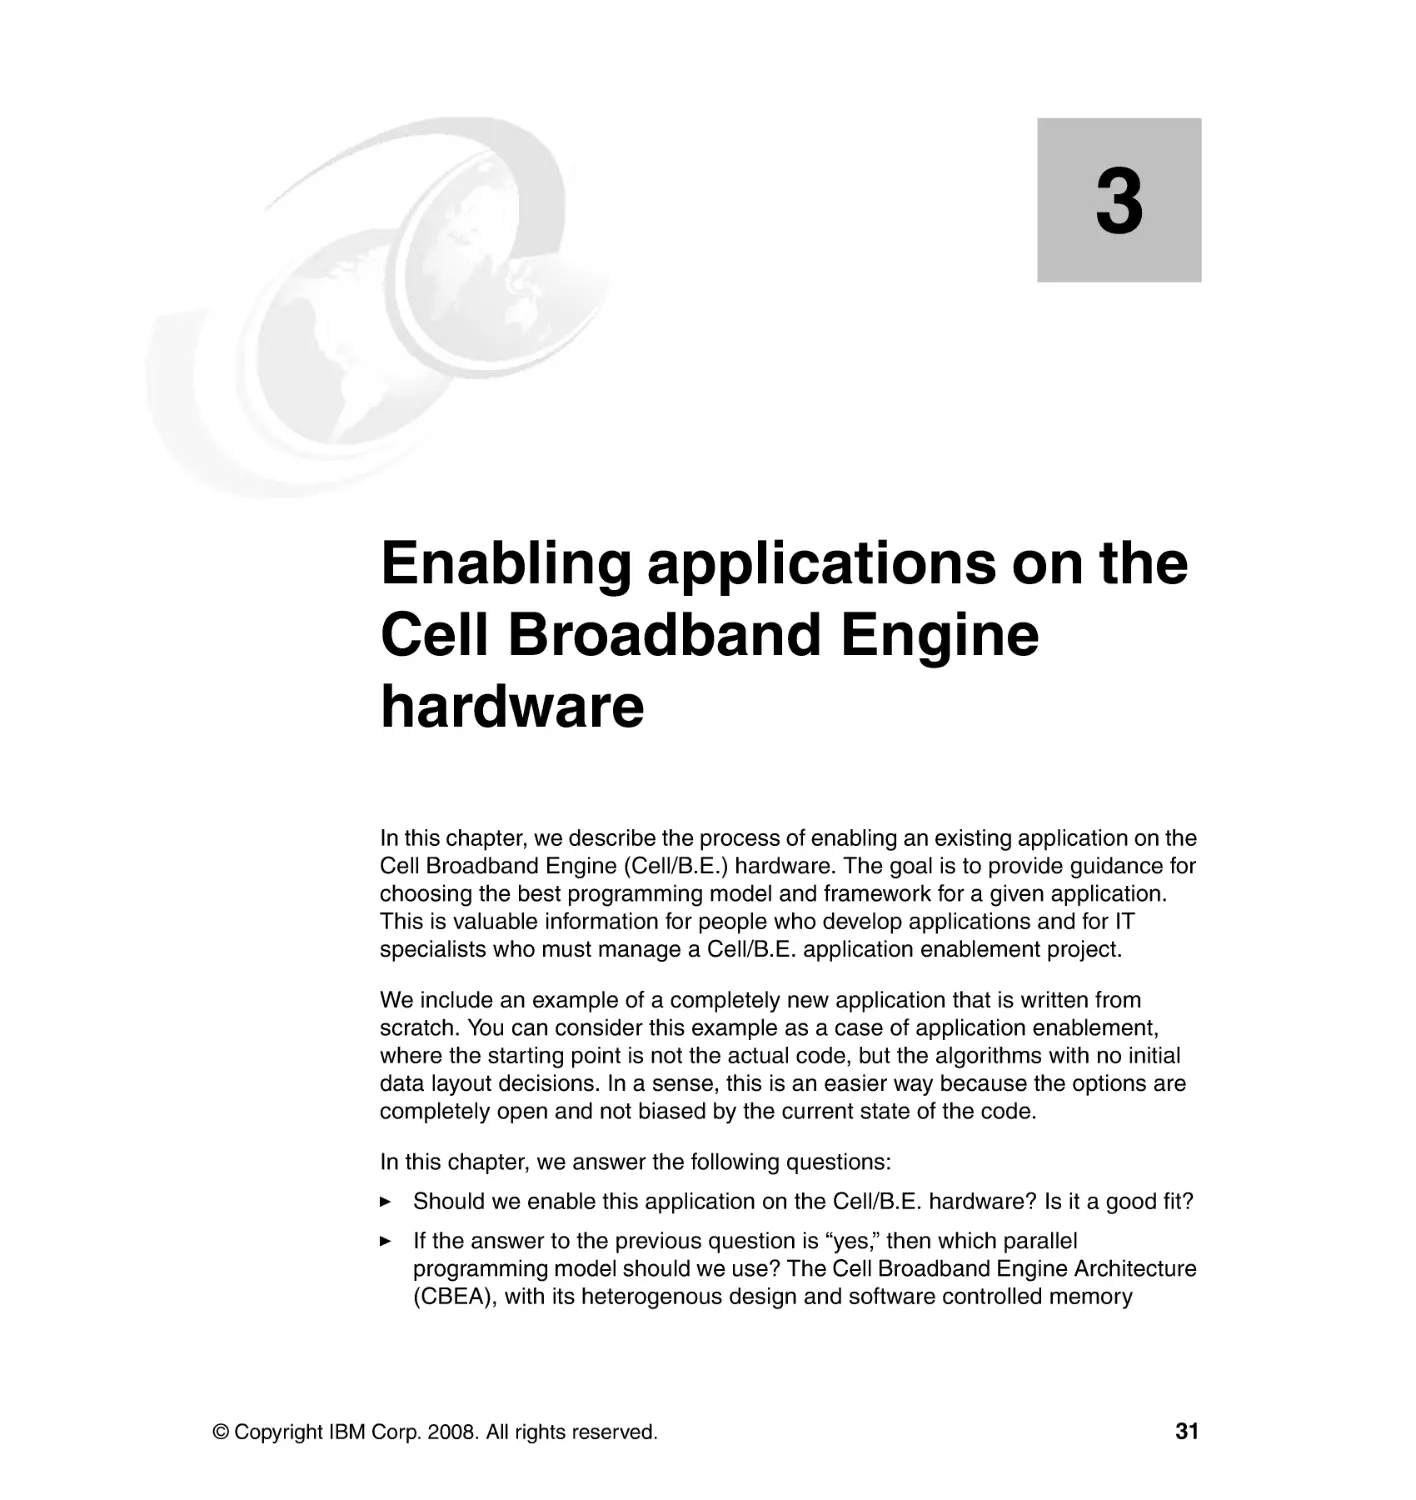 Chapter 3. Enabling applications on the Cell Broadband Engine hardware